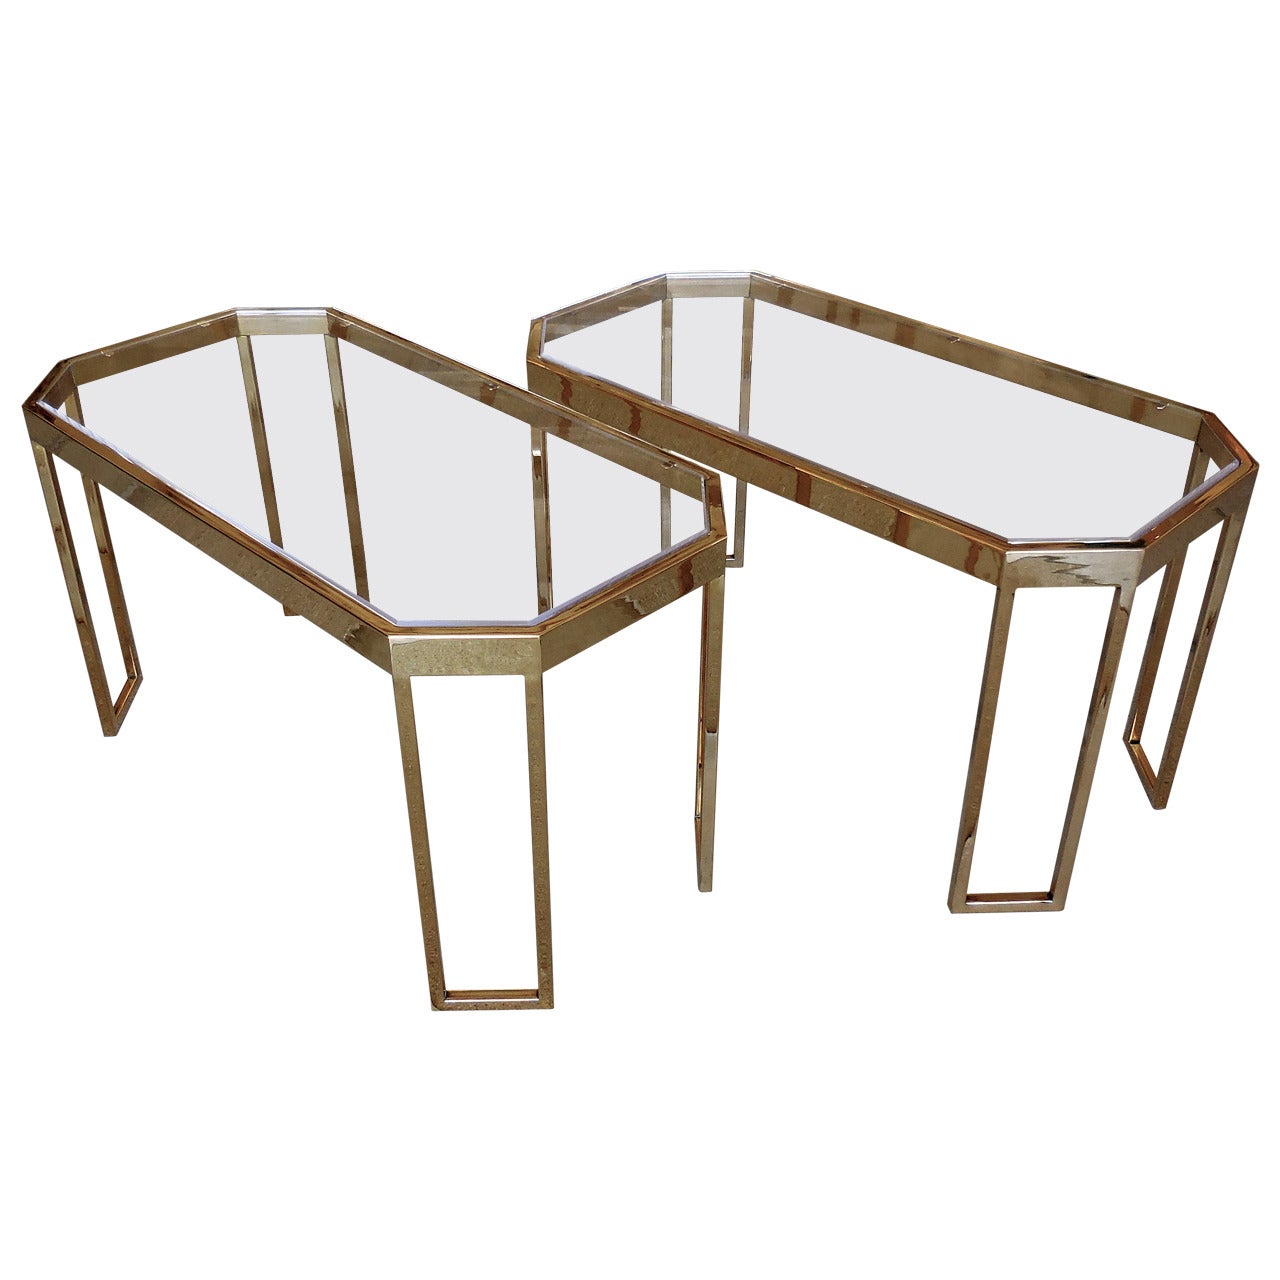 Rare Pair of Brass-Plated Boxline Side Tables by Charles Hollis Jones